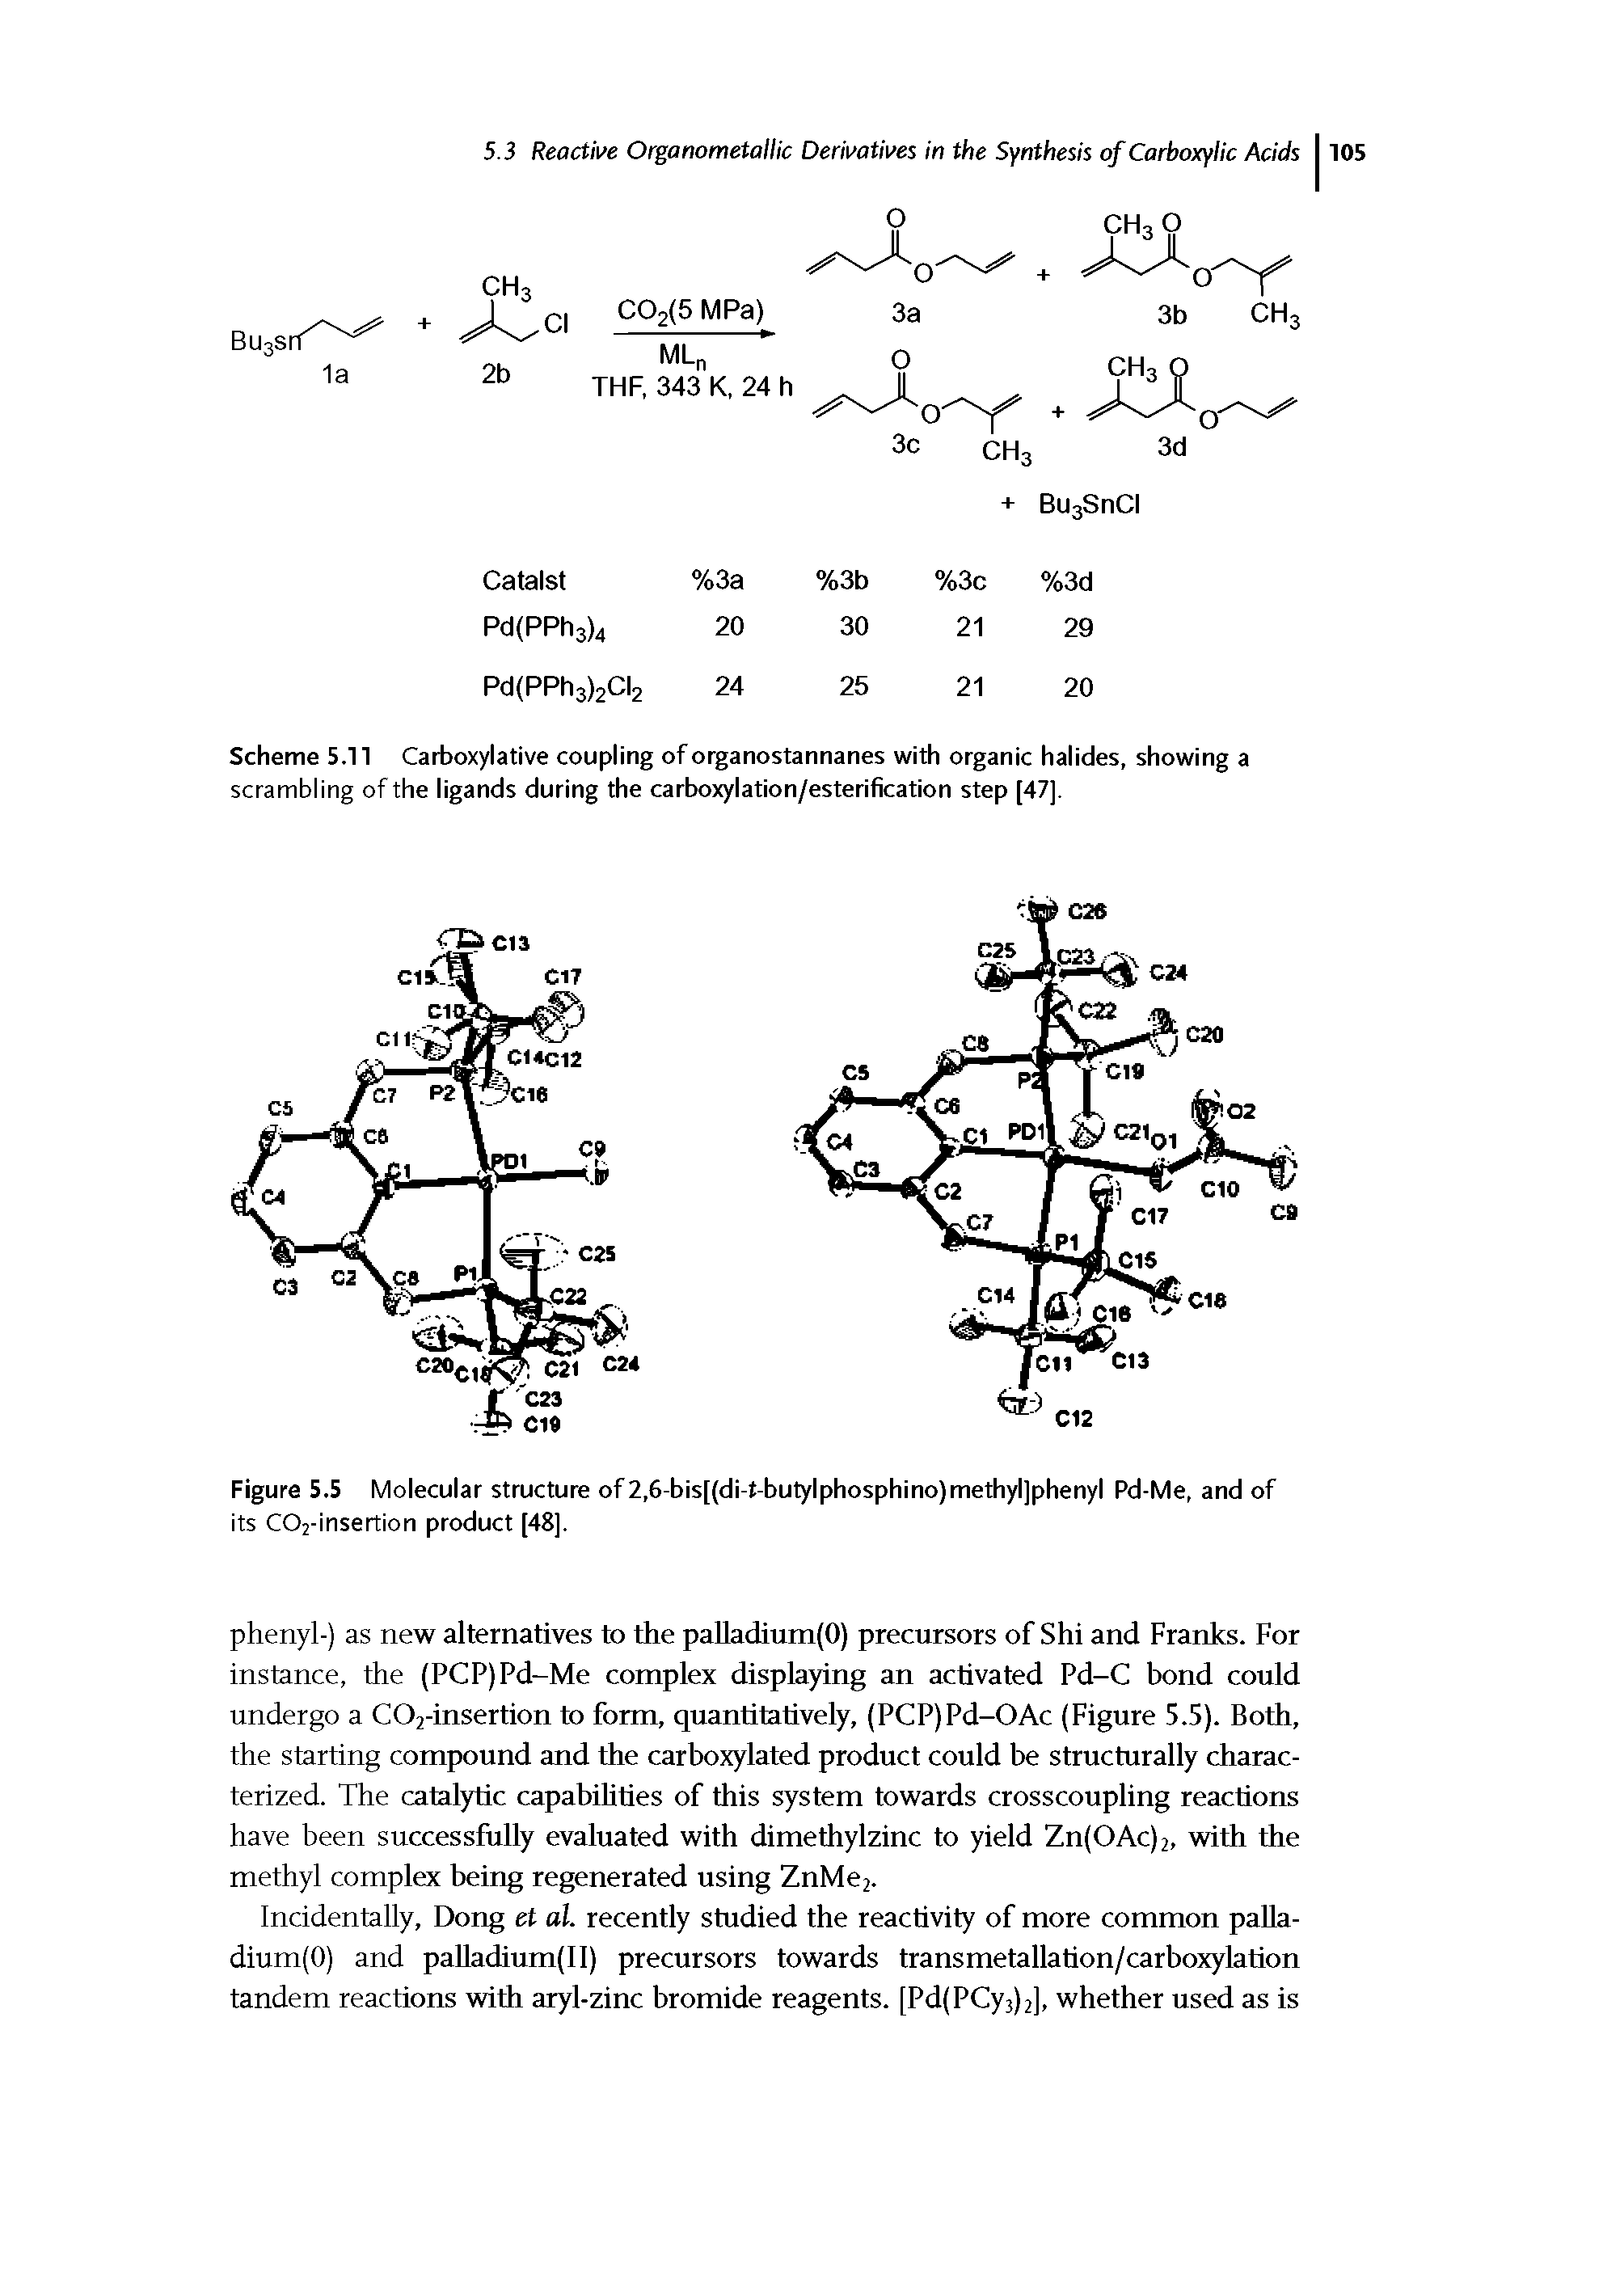 Scheme 5.11 Carboxylative coupling of organostannanes with organic halides, showing a scrambling of the ligands during the carboxylation/esterification step [47],...